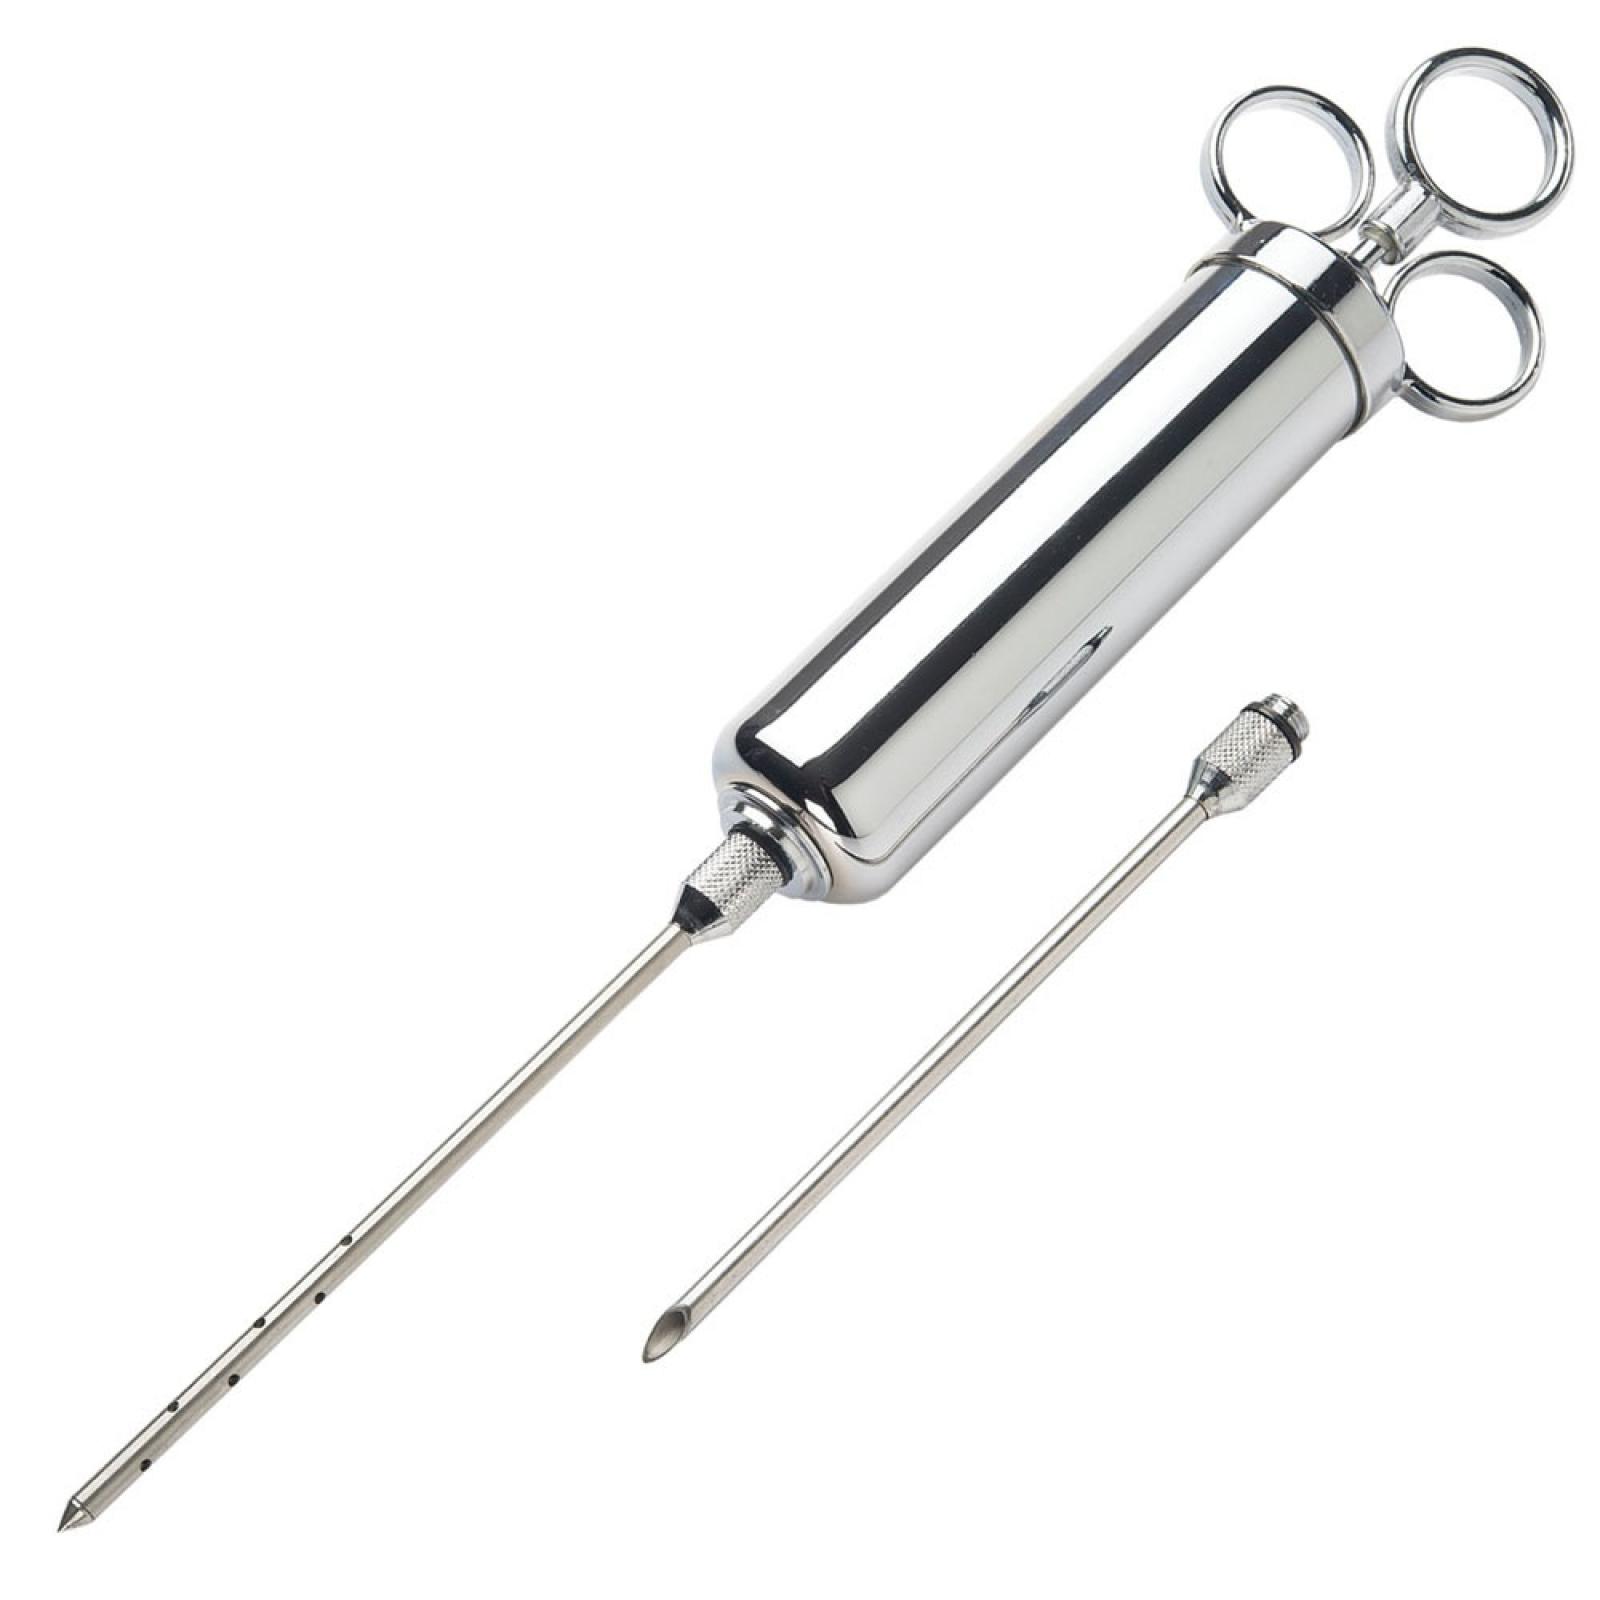 LEM 4oz Commercial Meat Injector with two needles